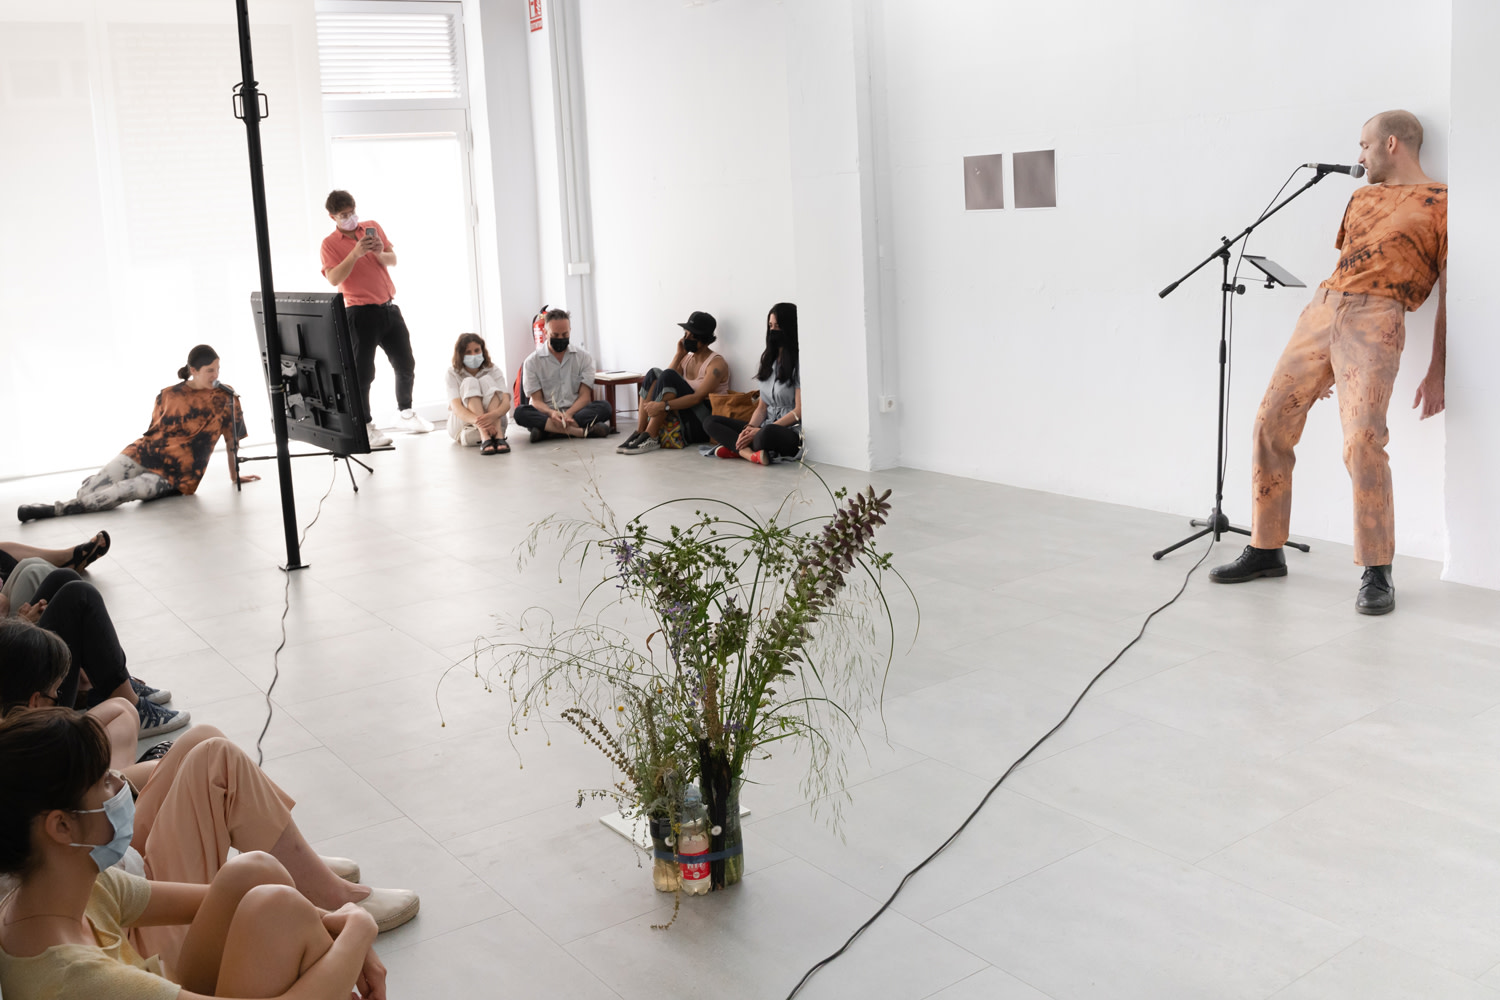 Eulàlia Rovira and Adrian Schindler performing at the exhibition. Pradiauto, Madrid, 2021